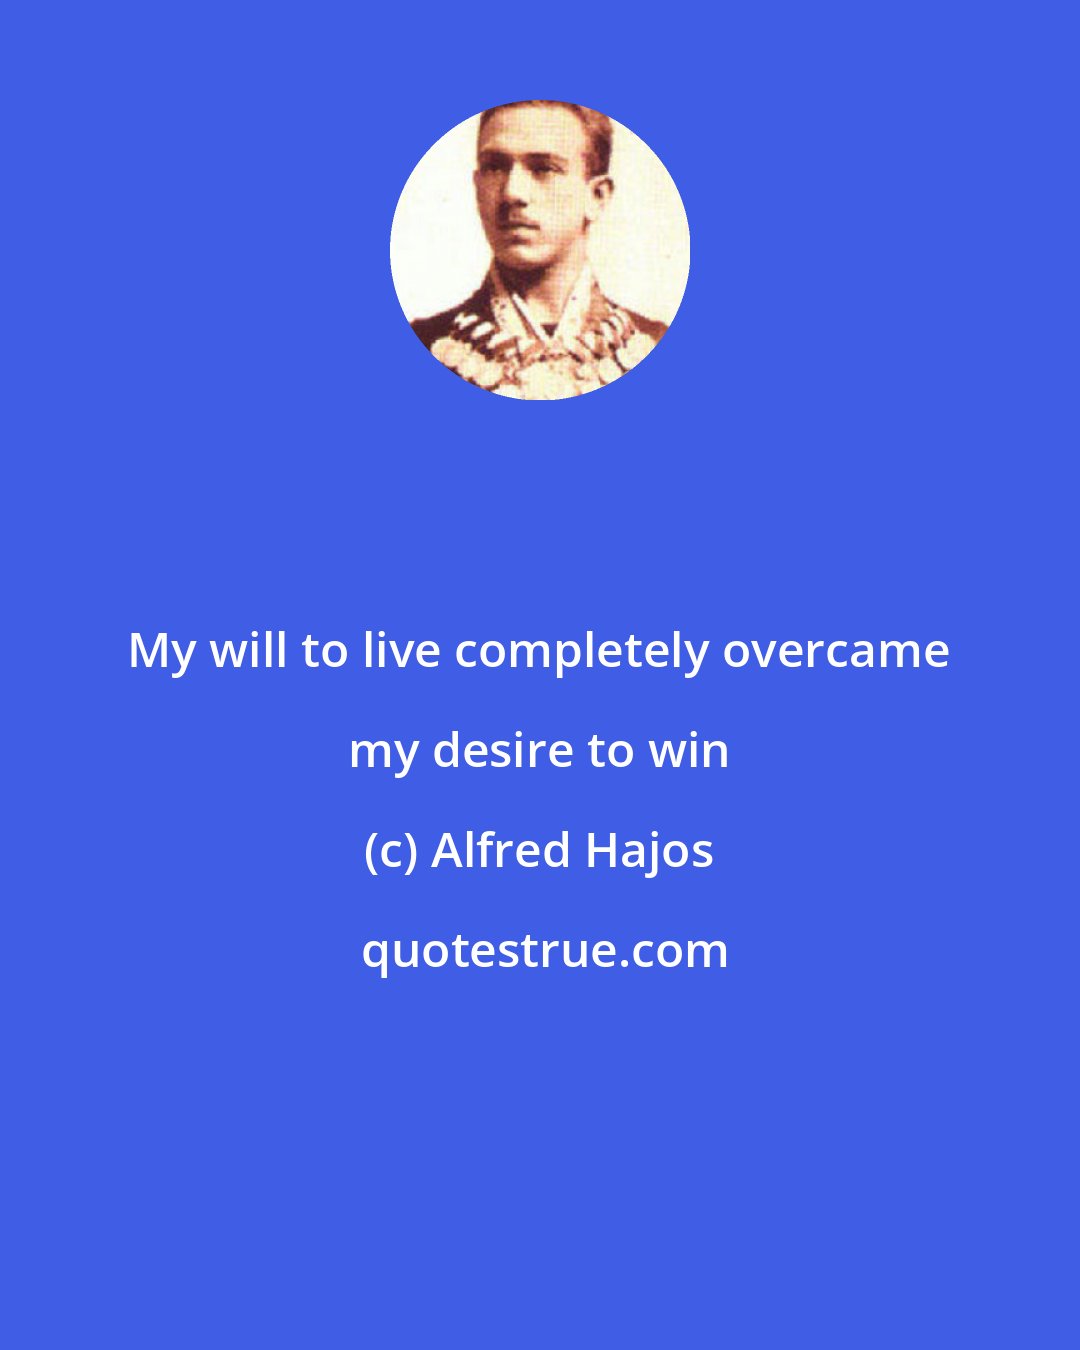 Alfred Hajos: My will to live completely overcame my desire to win